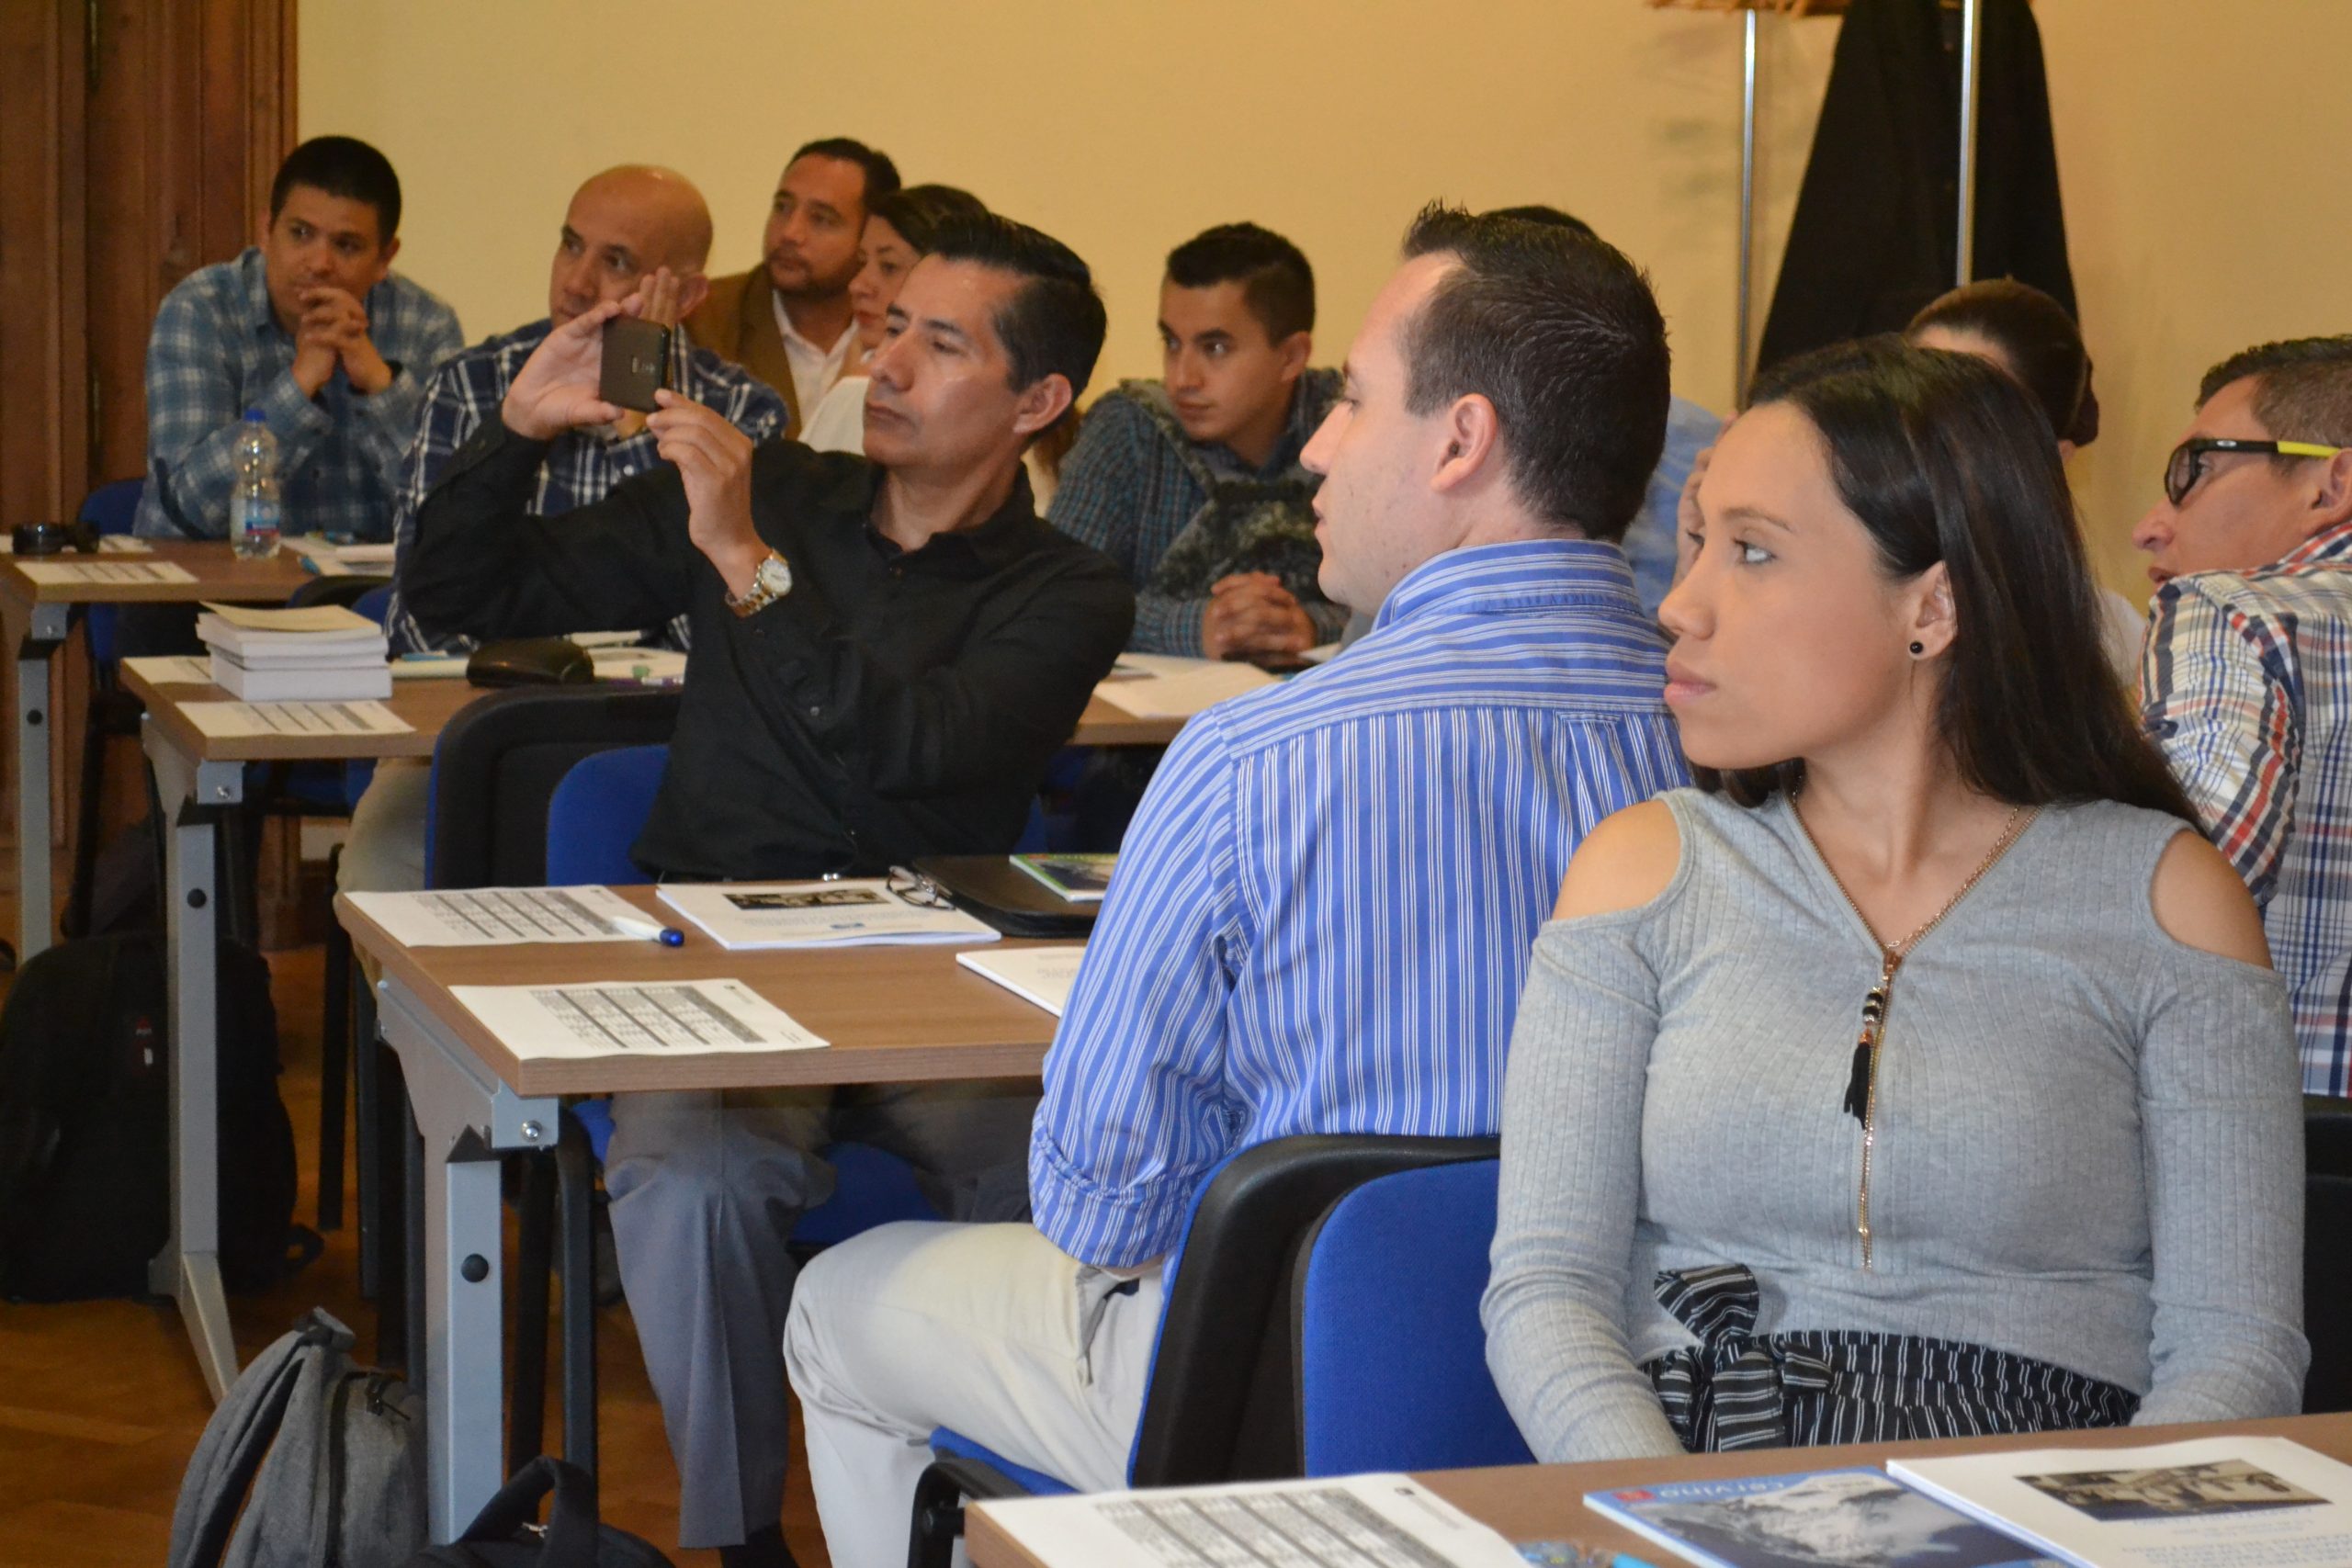 Special projects and training activities for Latinoamerica now available